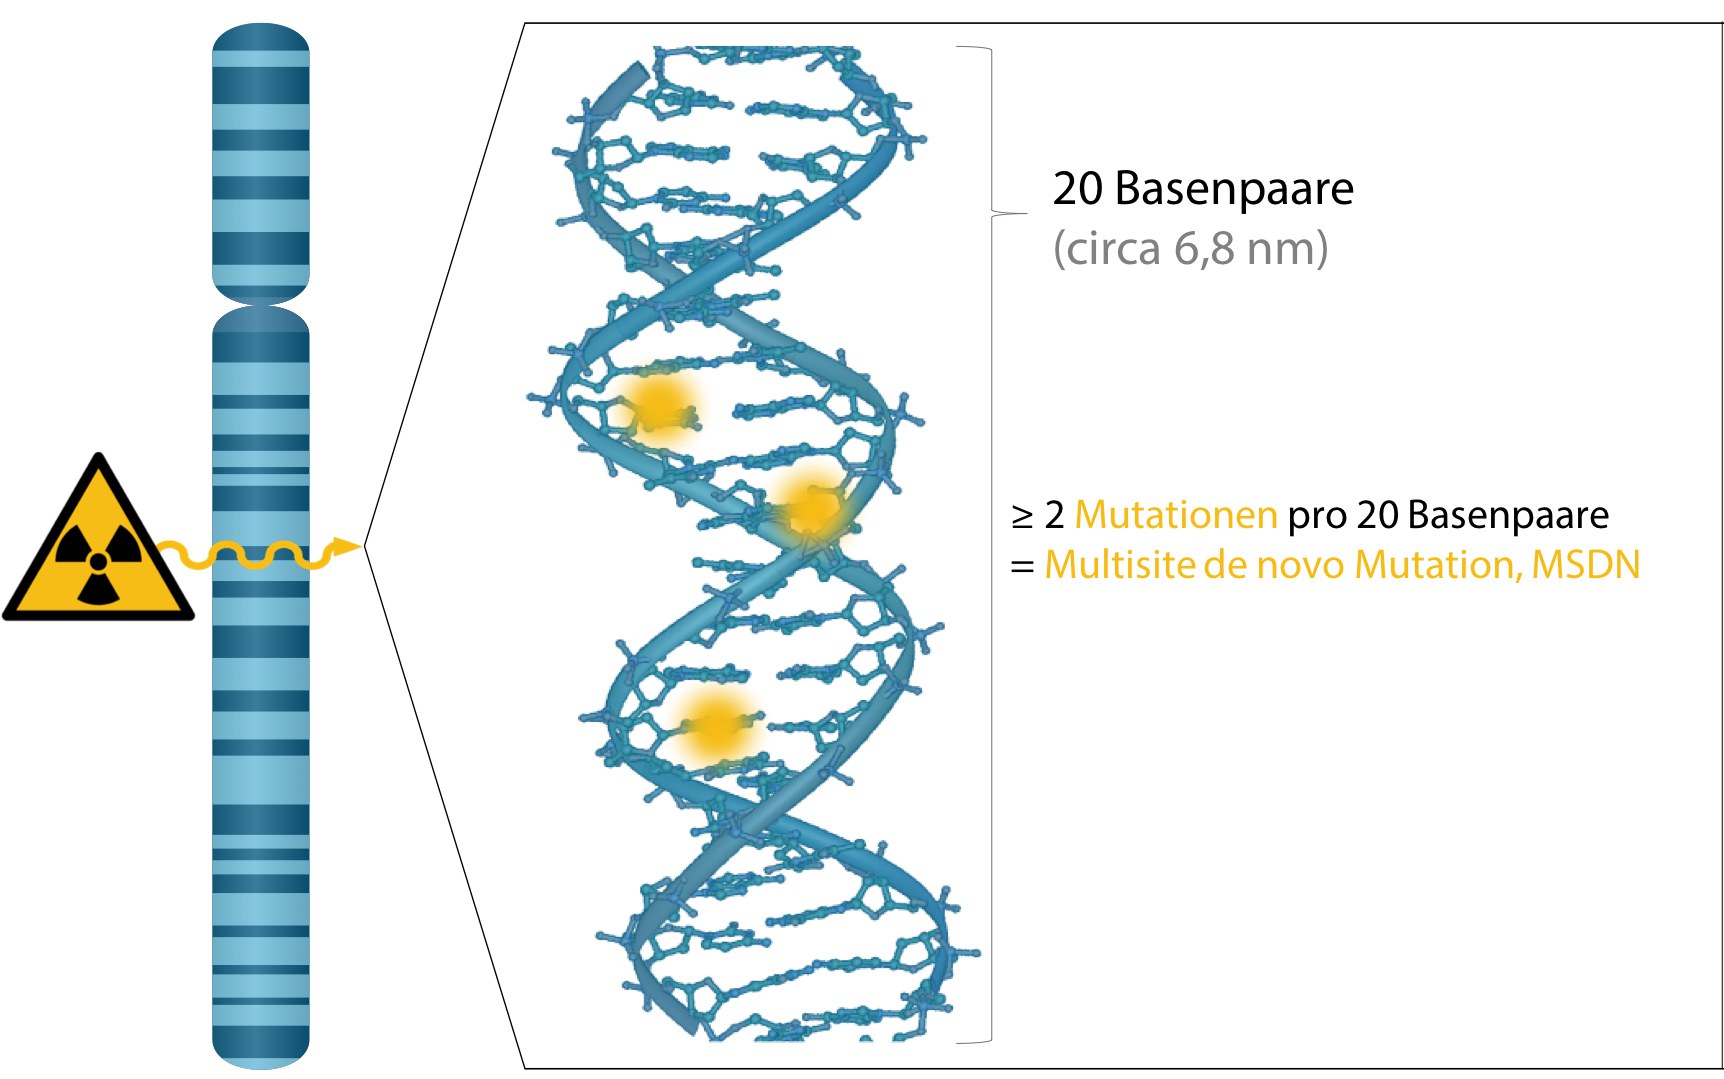 The graph illustrates how radiation alters the genome: